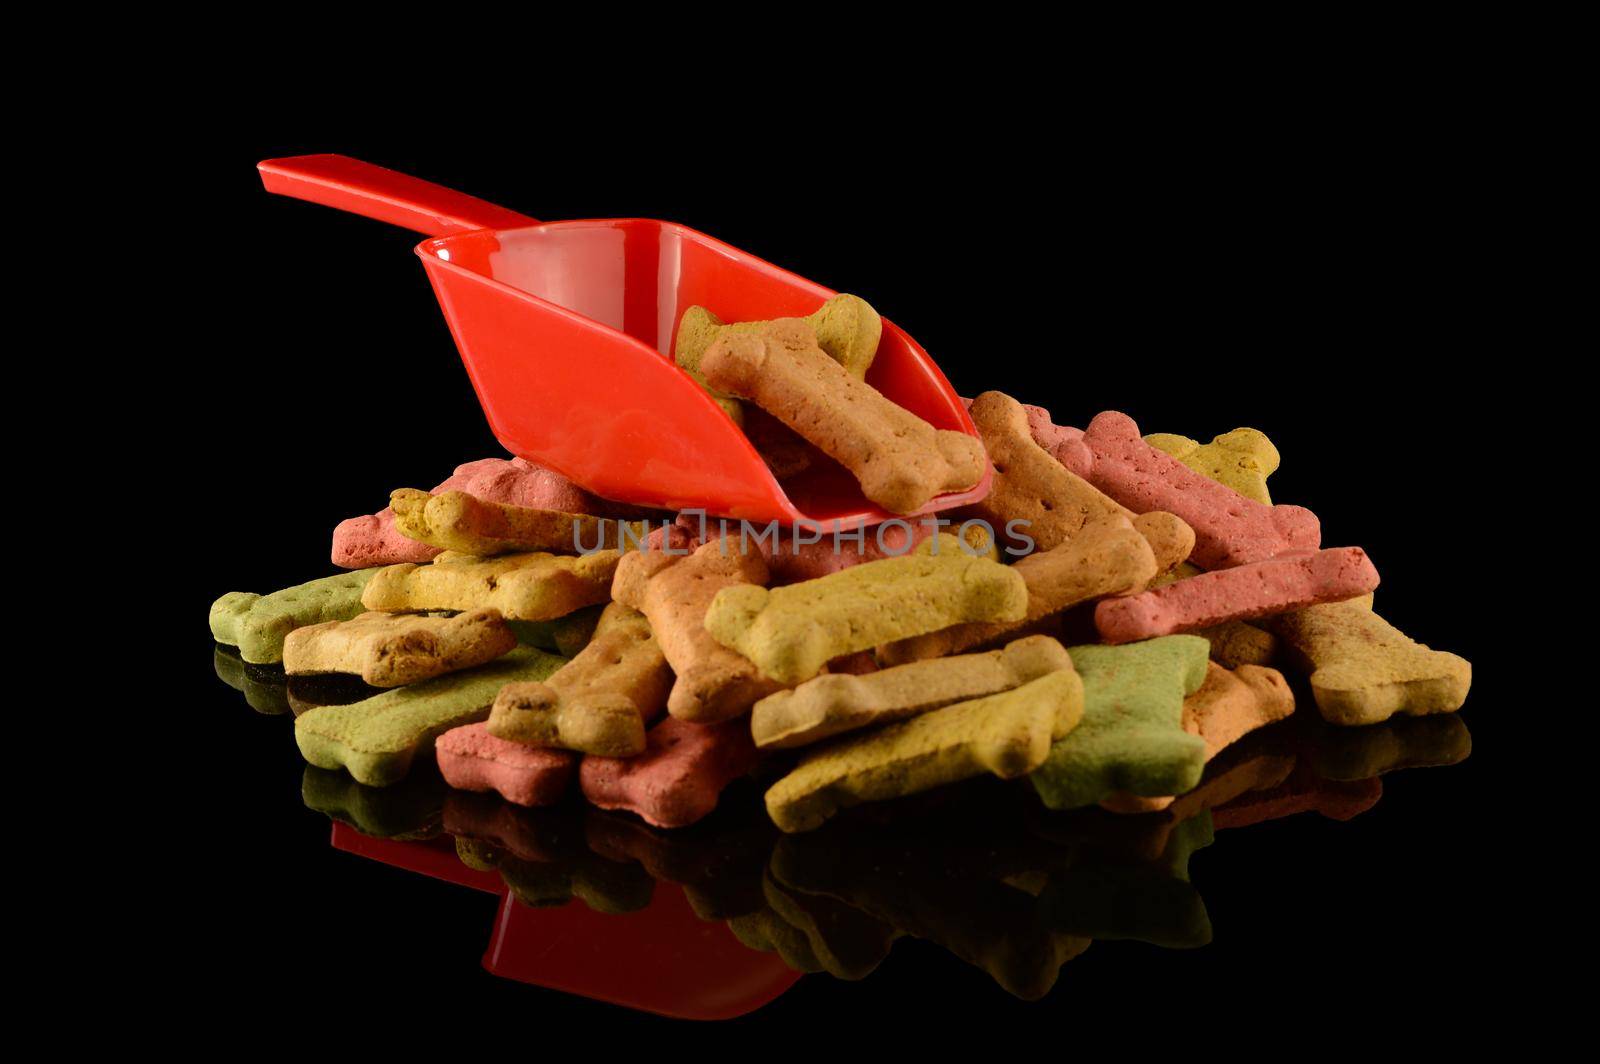 A plentiful pile of dog bone shaped biscuit treats with a red scoop for dishing them out that is isolated over a black reflective background.